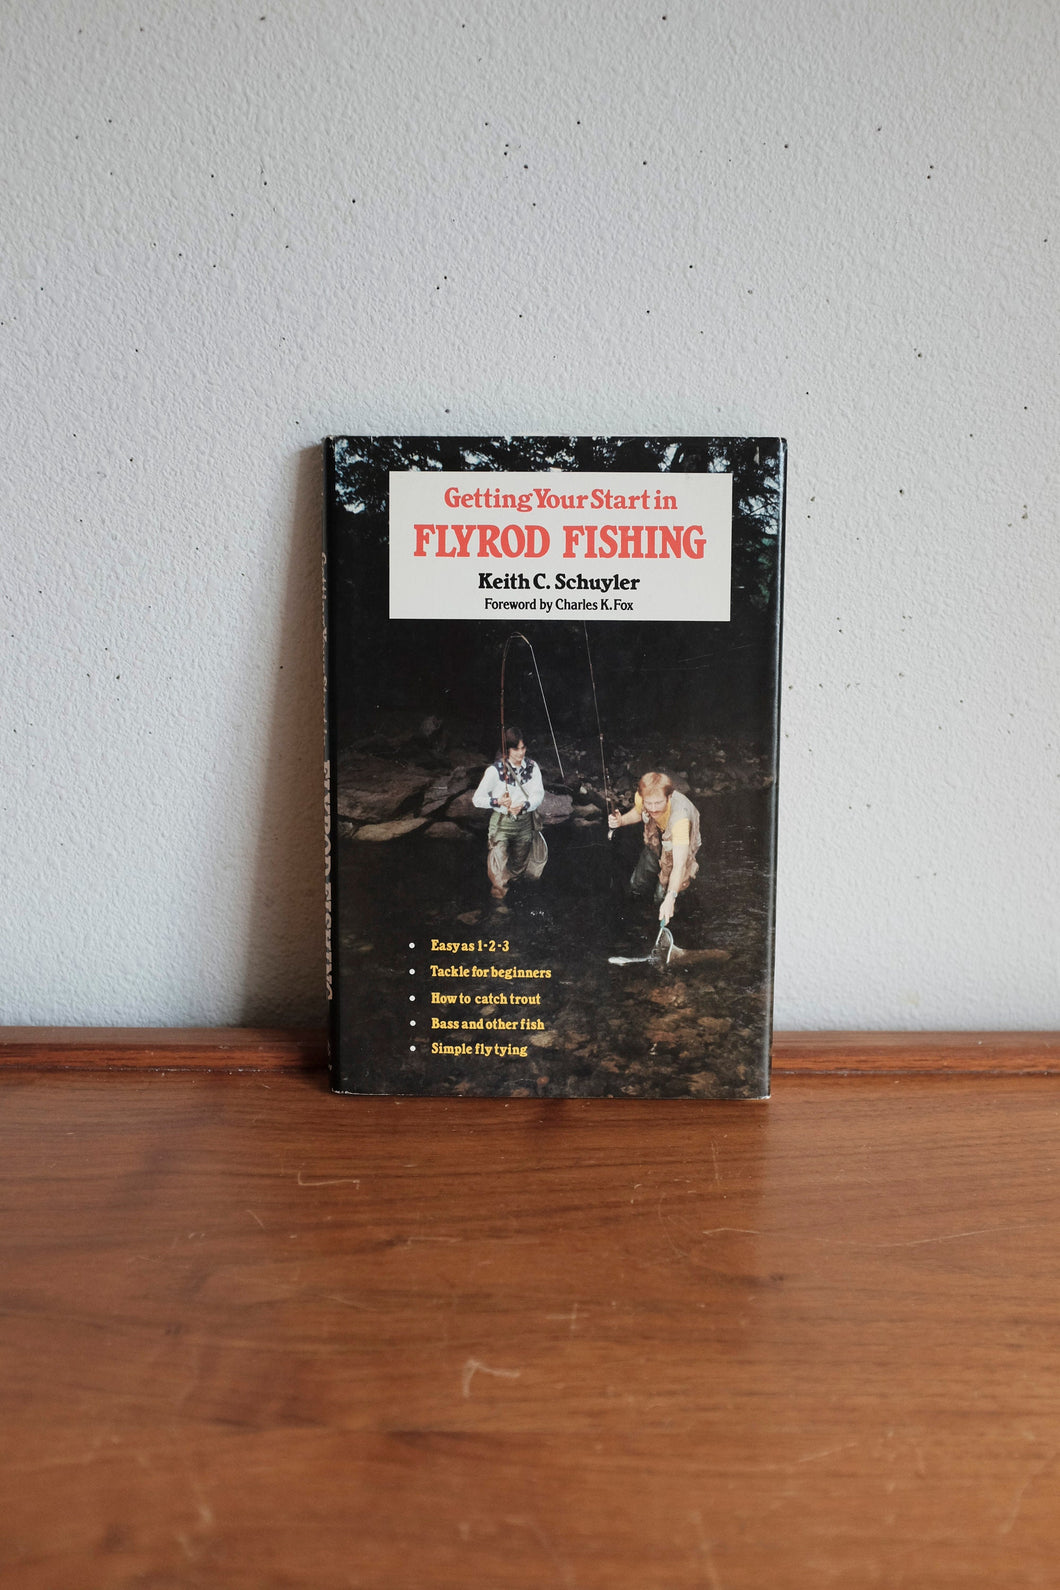 1979 Getting your Start in Flyrod Fishing by Keith Schuyler - Hardcover